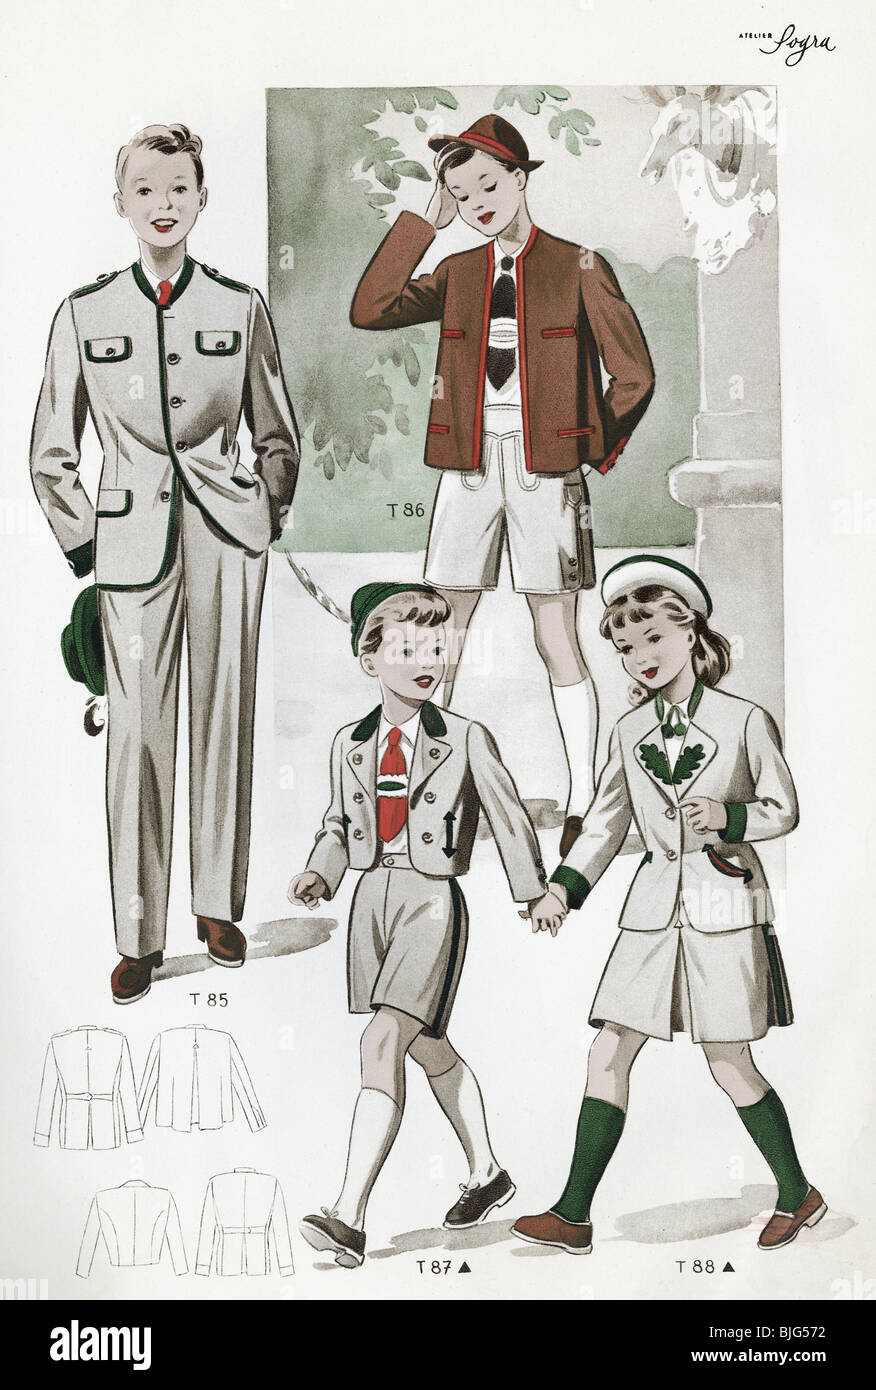 fashion, 1950s, clothes, clothing, children's fashion, traditional clothing for boys and girls, illustration from: "Trachtenmodelle fuer Damen und Herren", No. 2, Vienna, Austria, circa 1950, Stock Photo